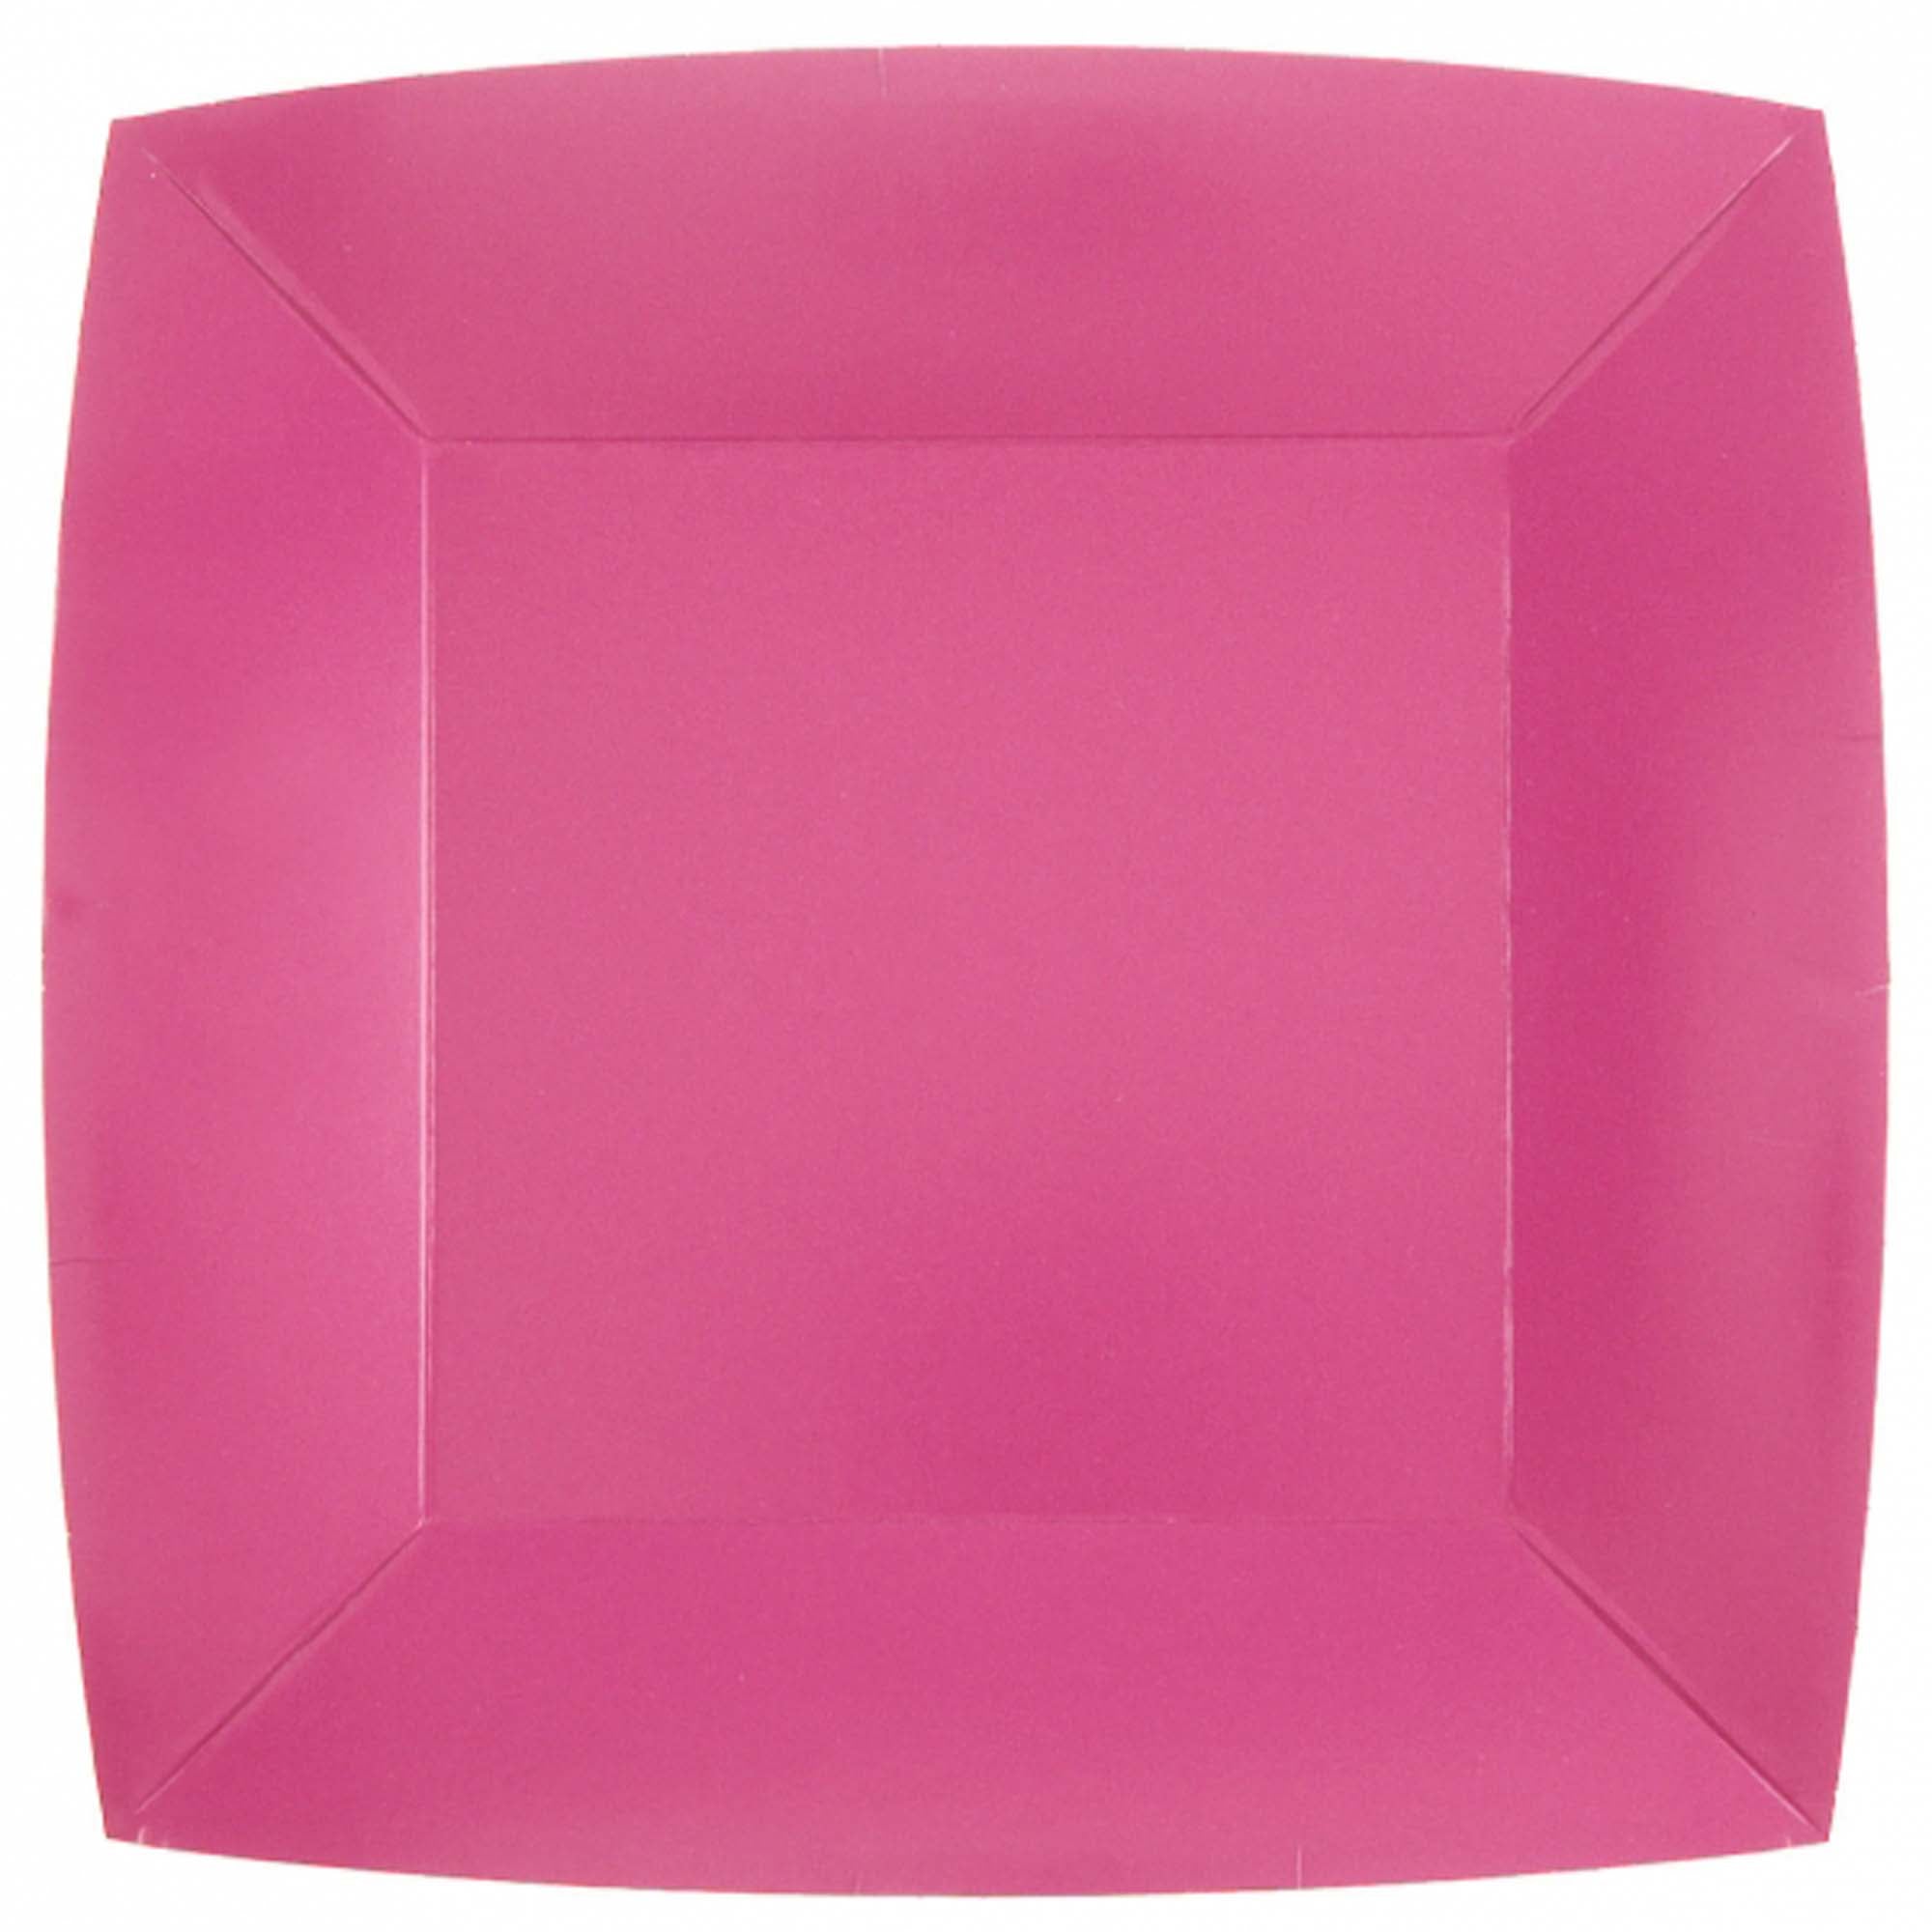 Candy Pink Large Square Compostable Lunch Party Paper Plates, 9 Inches, 10 Count